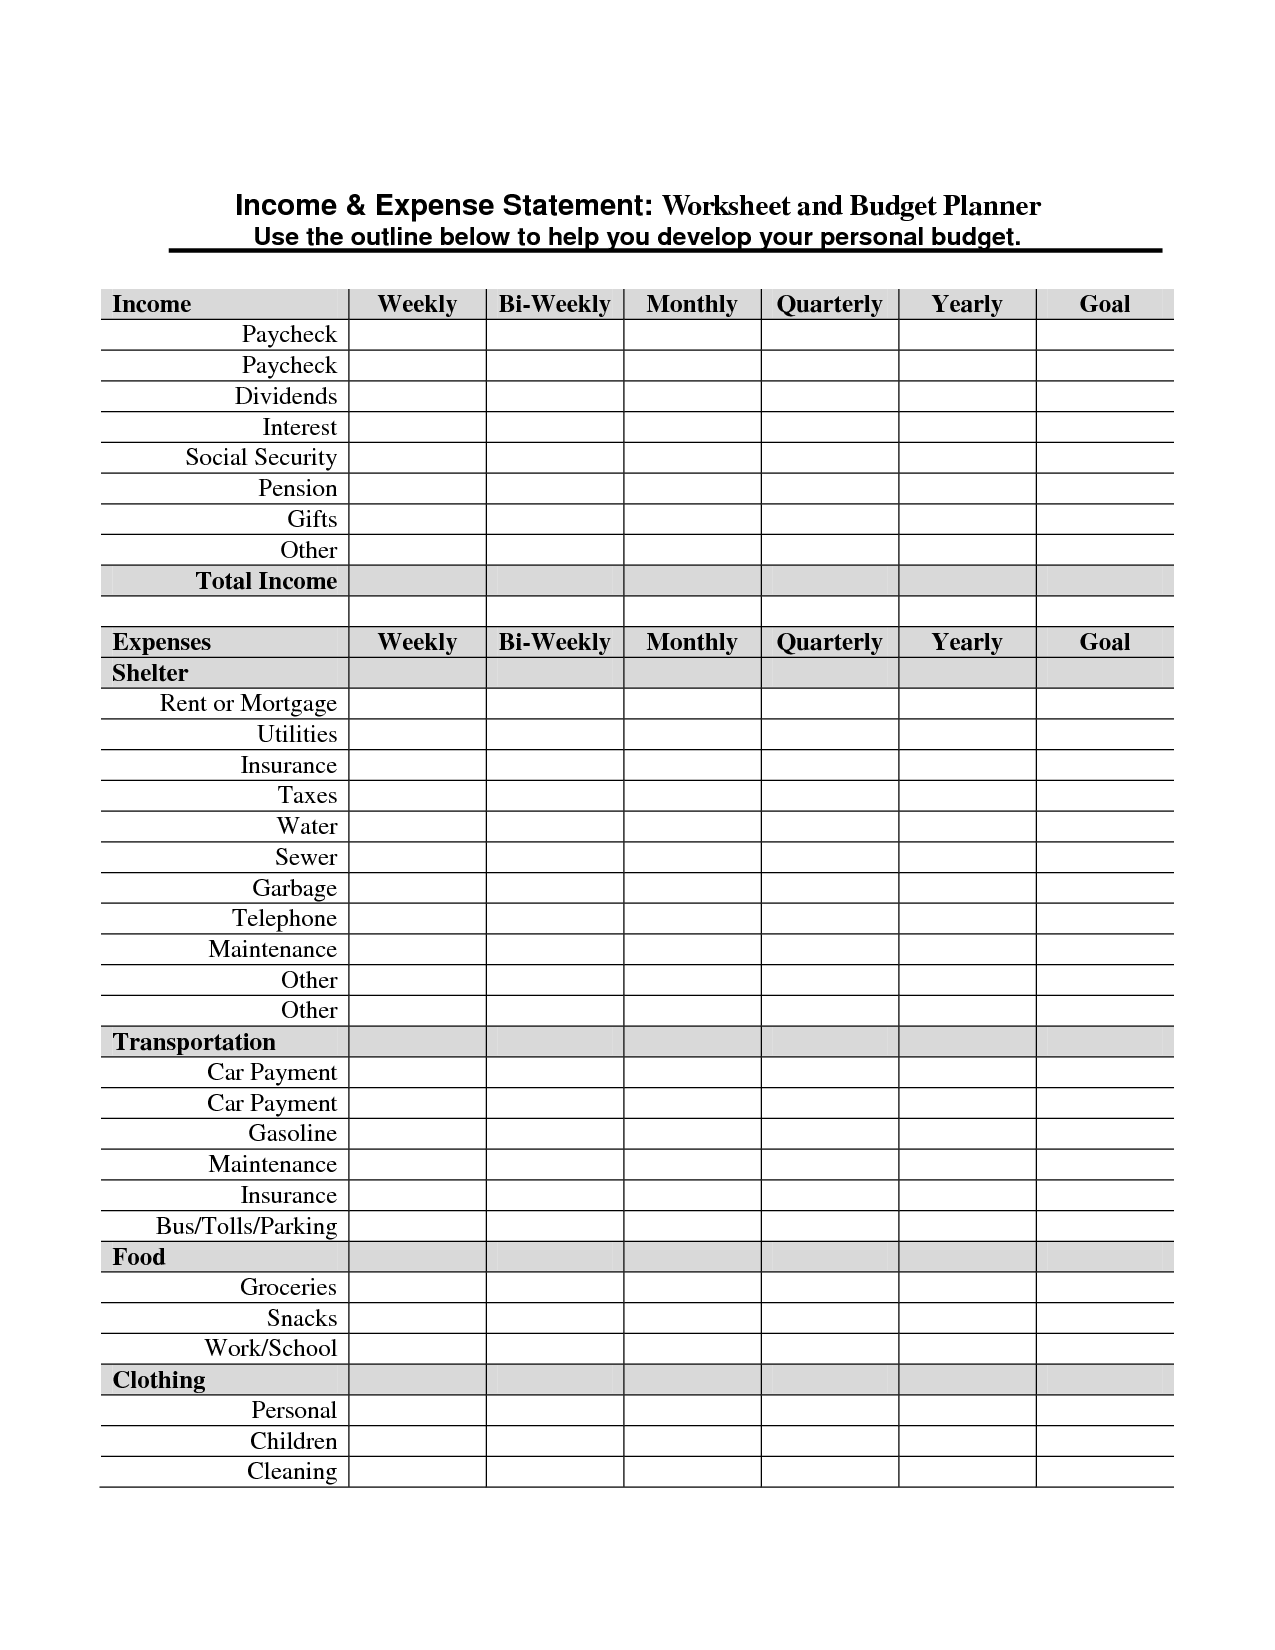 13 Best Images of Monthly Income Expense Worksheet ...